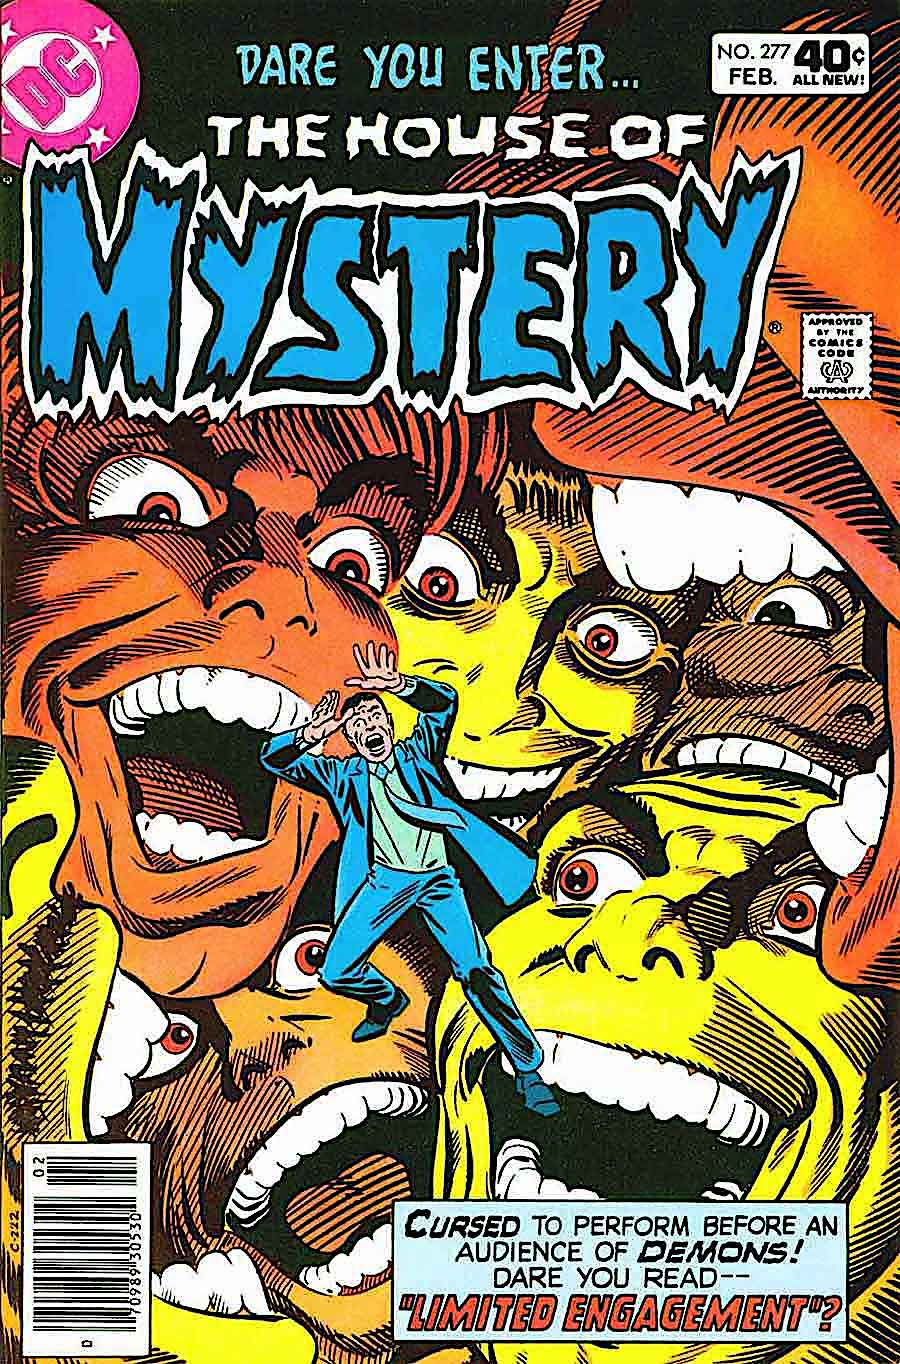 Steve Ditko anxiety, The House Of Mystery 277